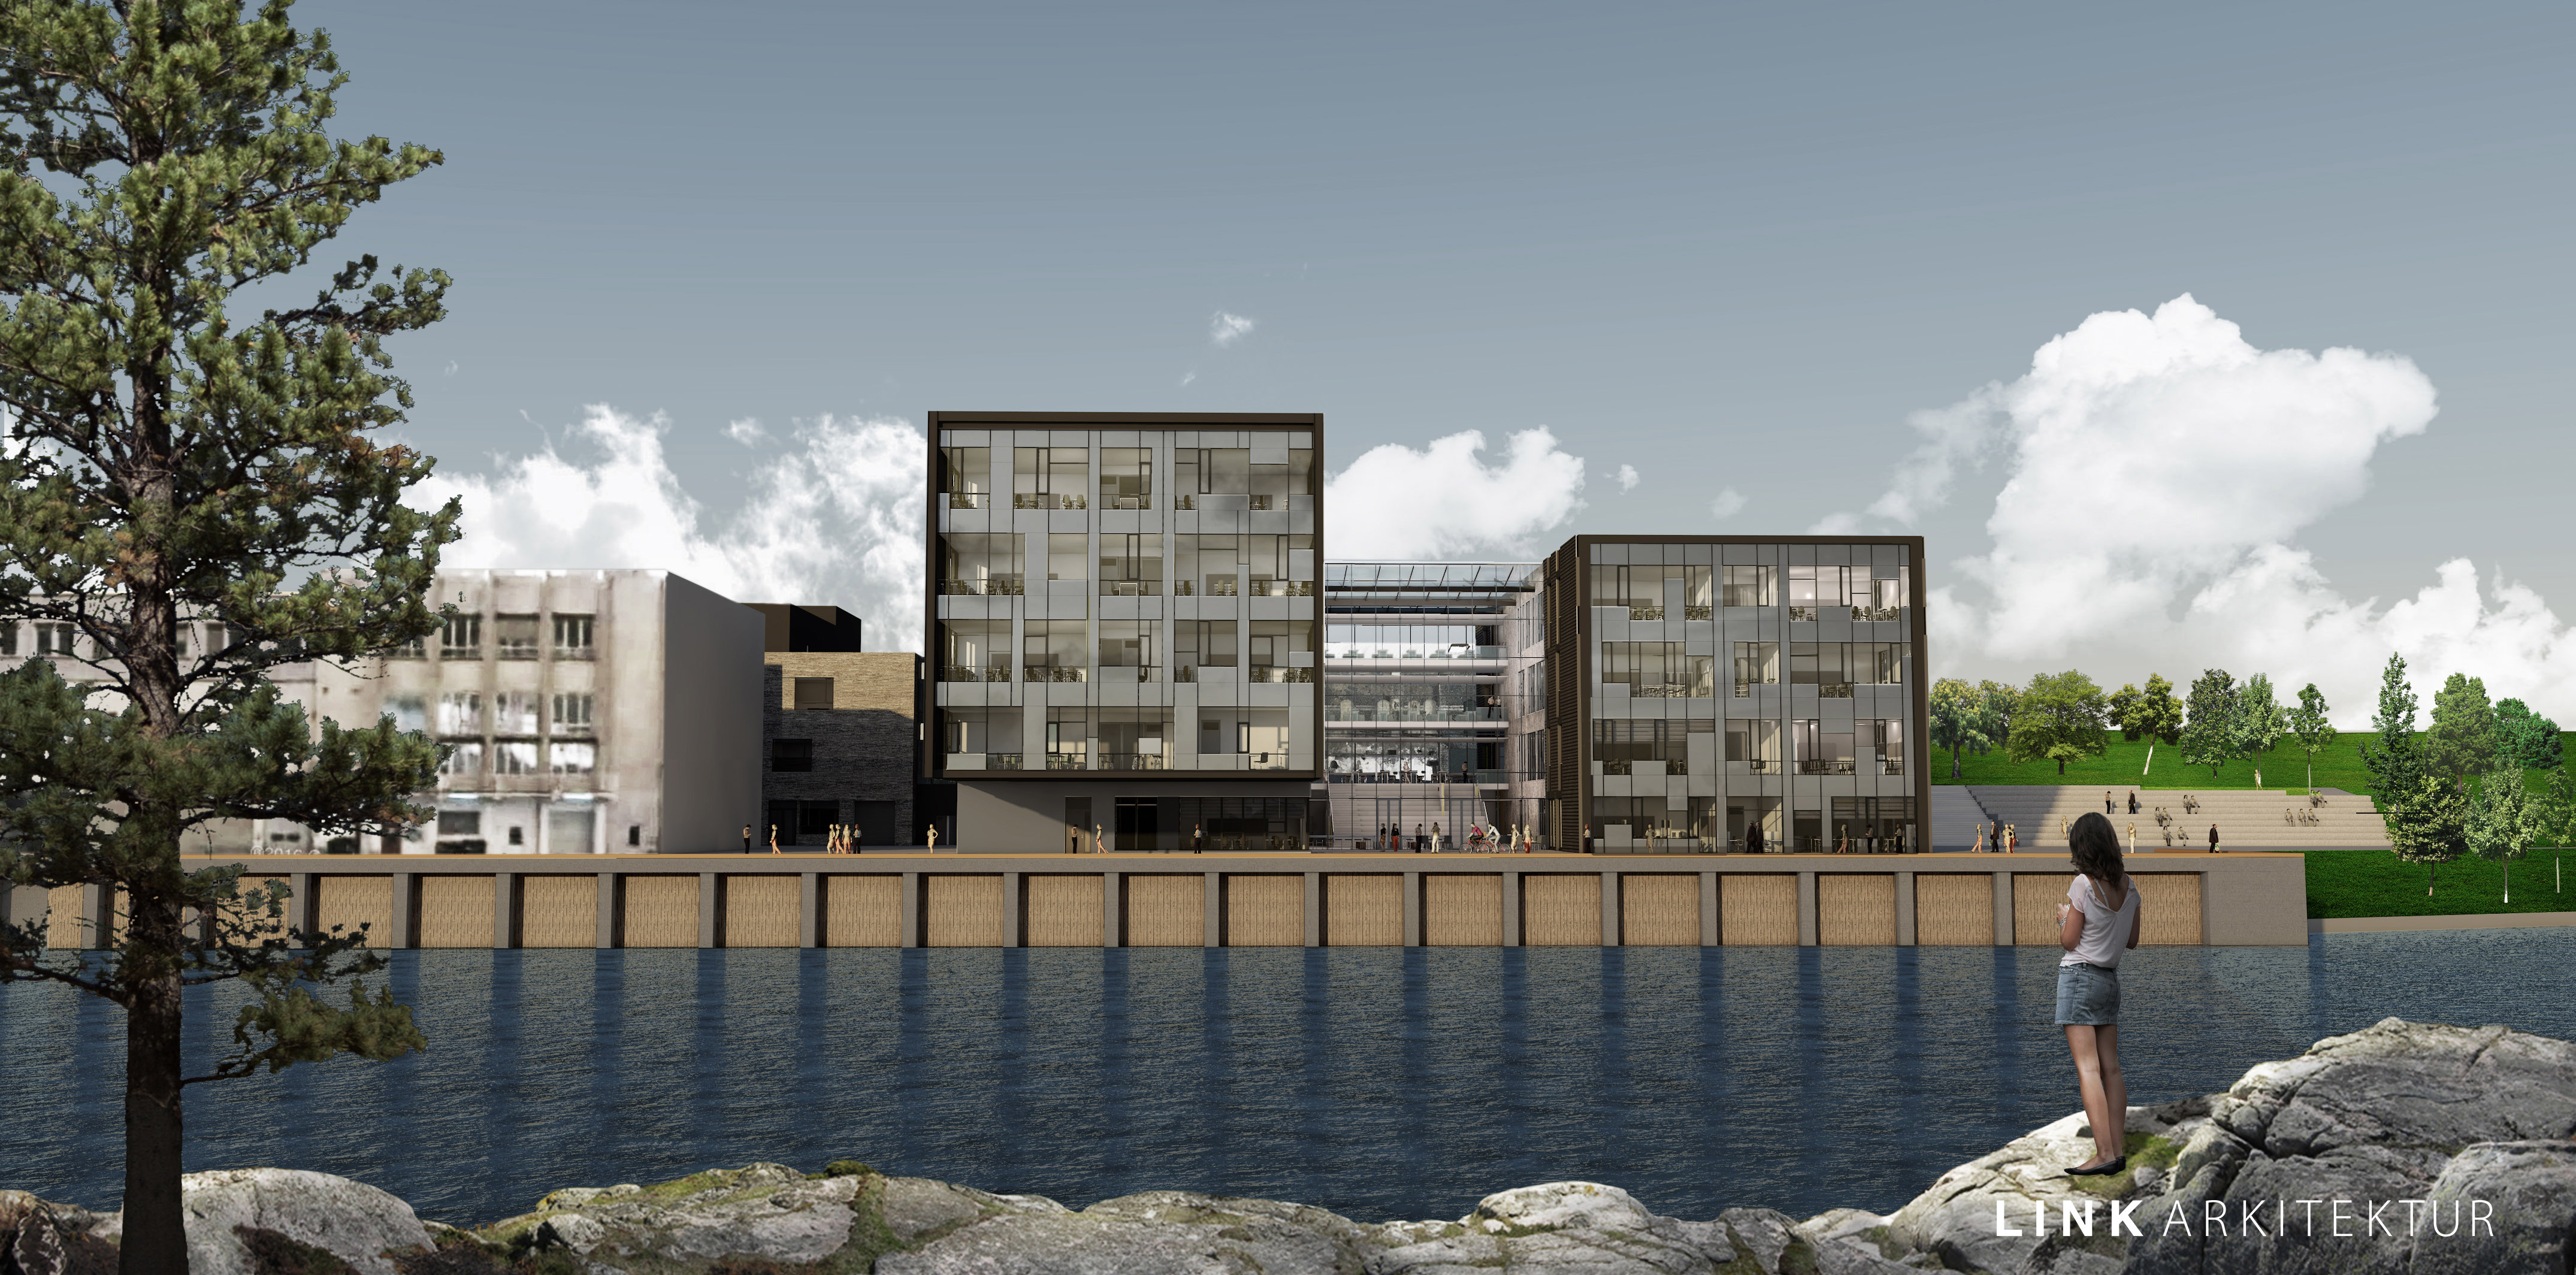 Skanska signs with Telemark county council to build new high school in Skien, Norway 